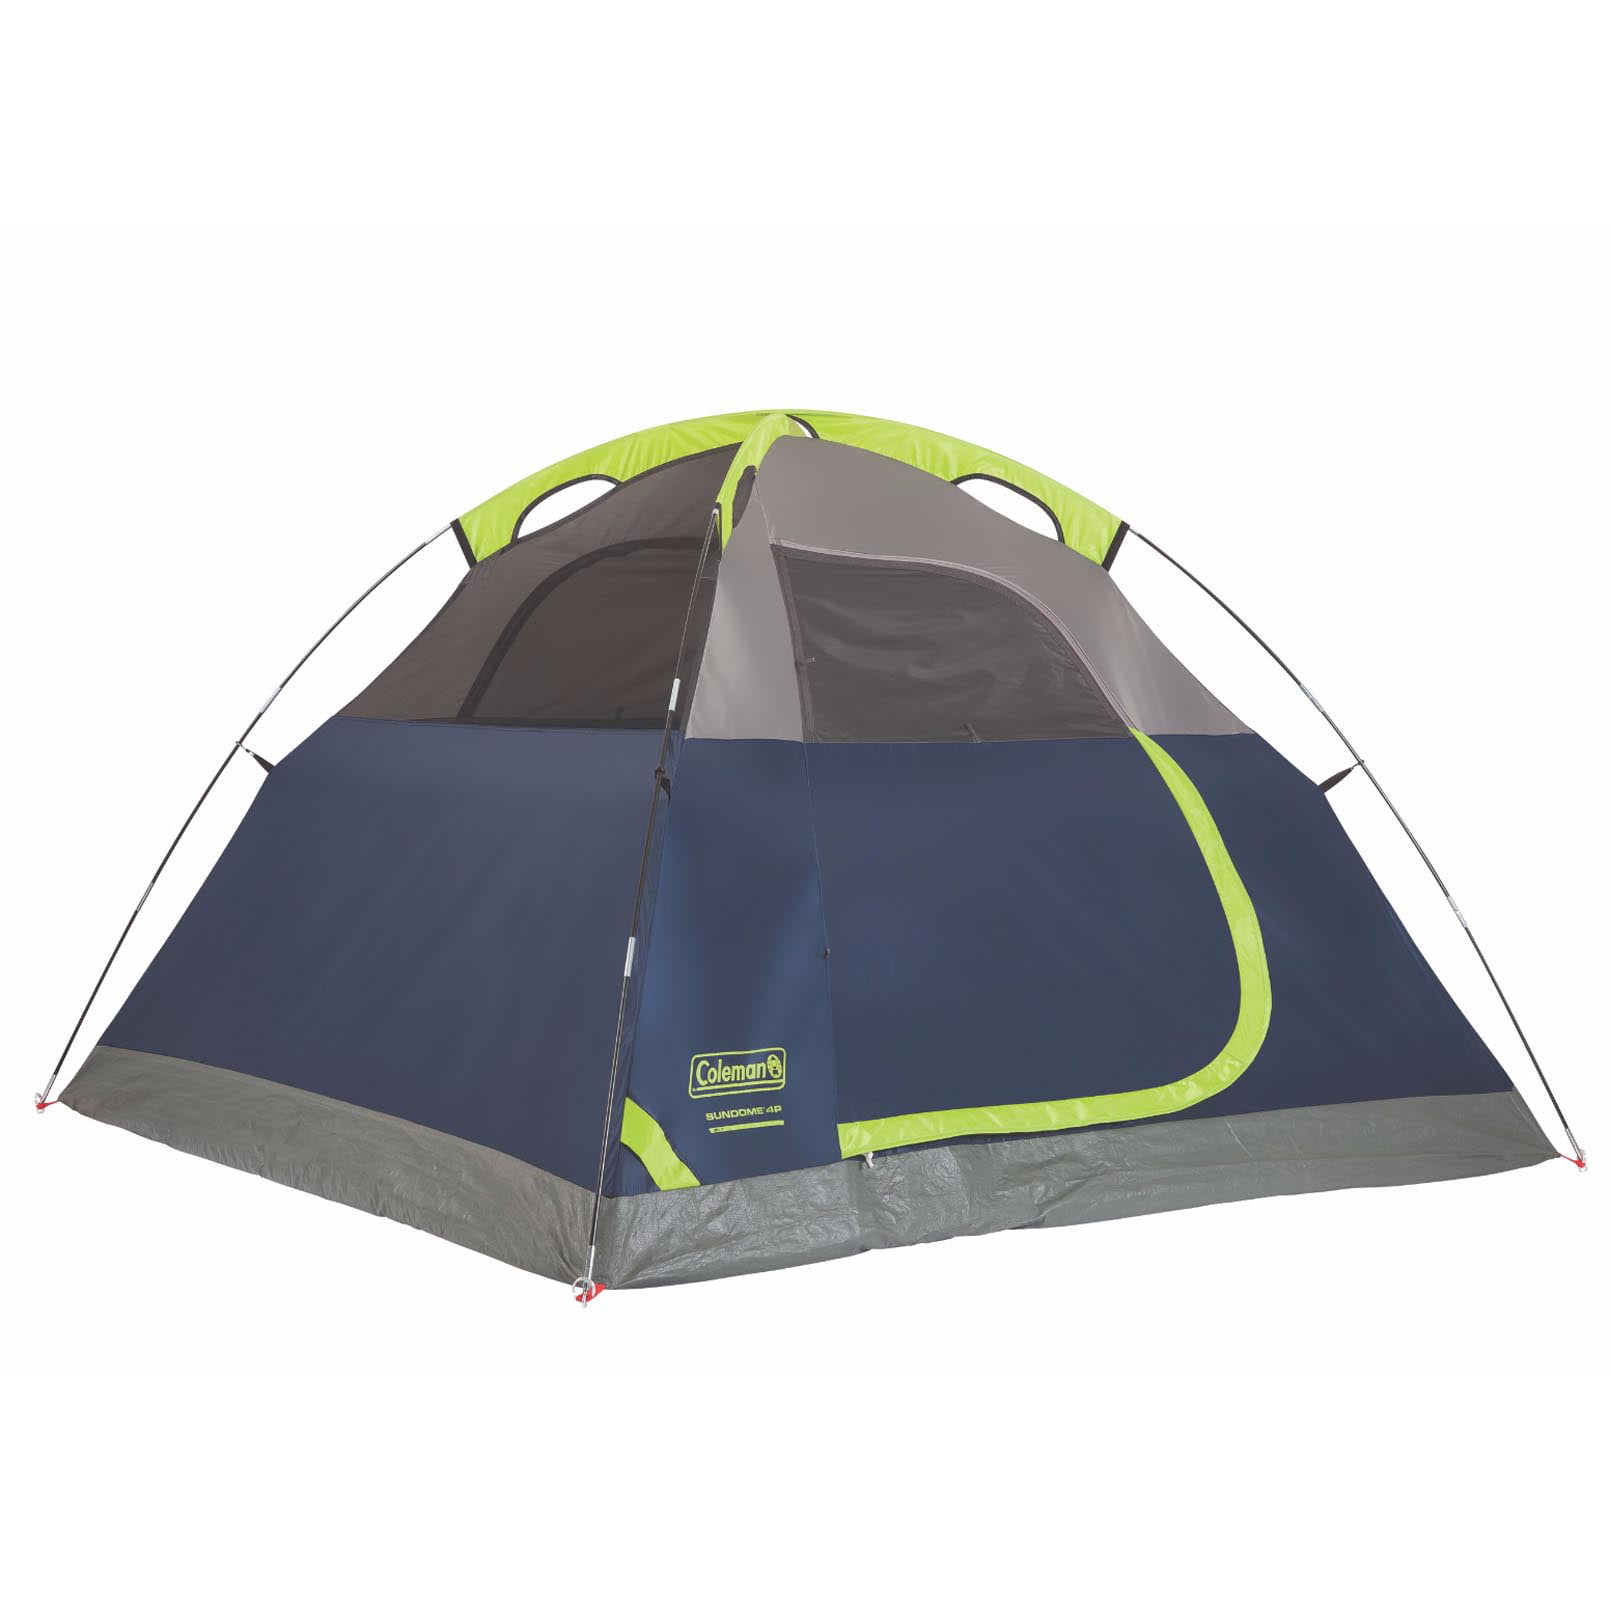 Coleman Sundome 4 Person Outdoor Hiking Camping Tent W Rainfly